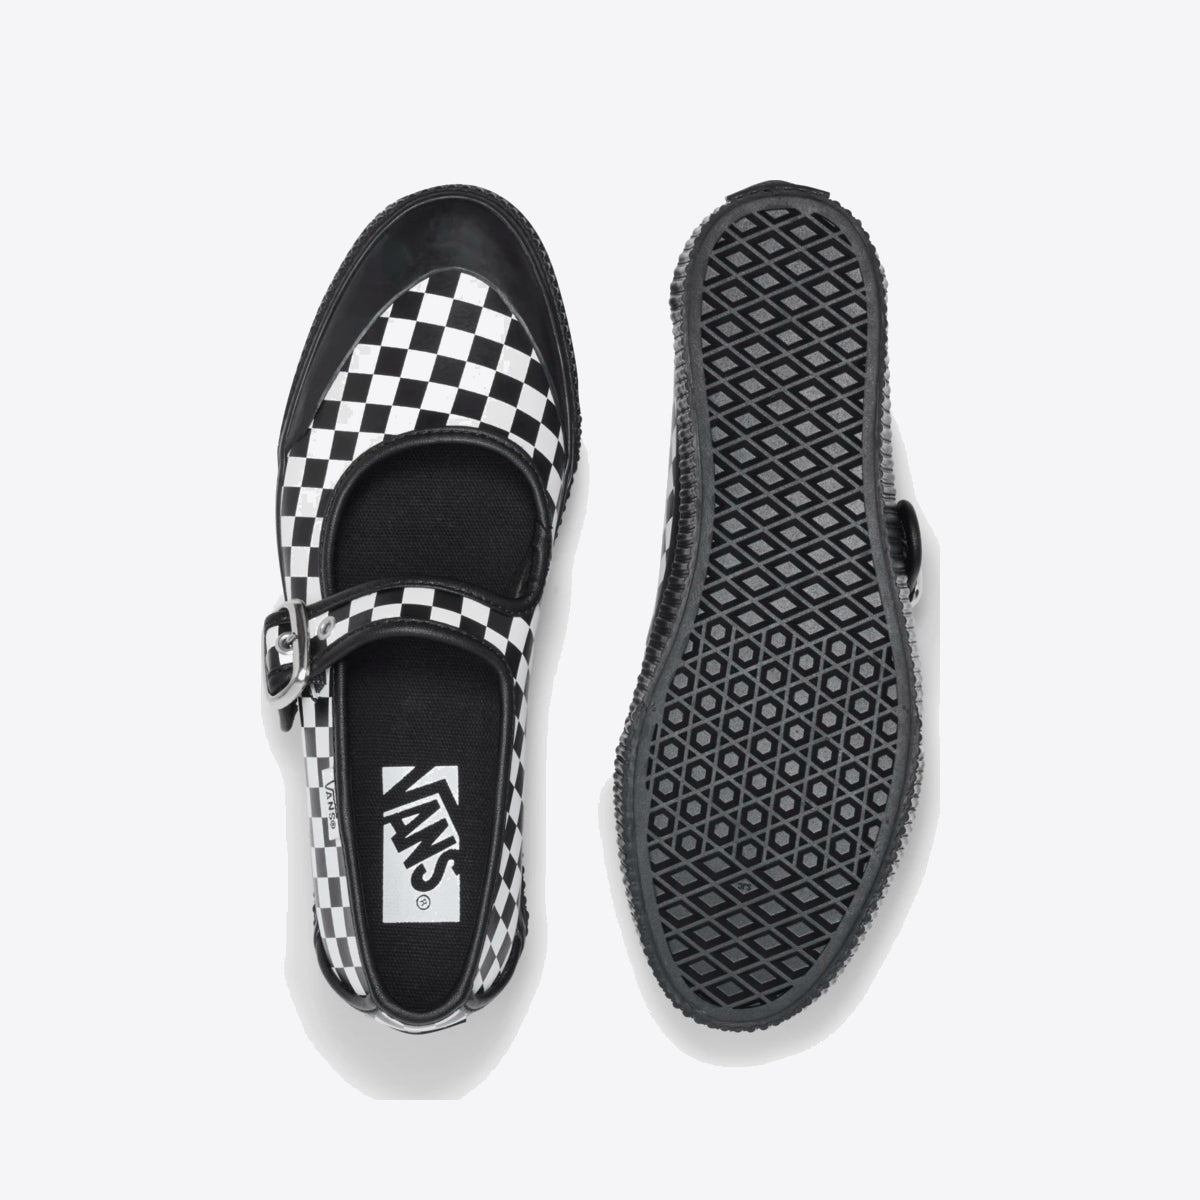 VANS Mary Jane LX Leather Creep Checkerboard Leather Checkerboard - Image 3